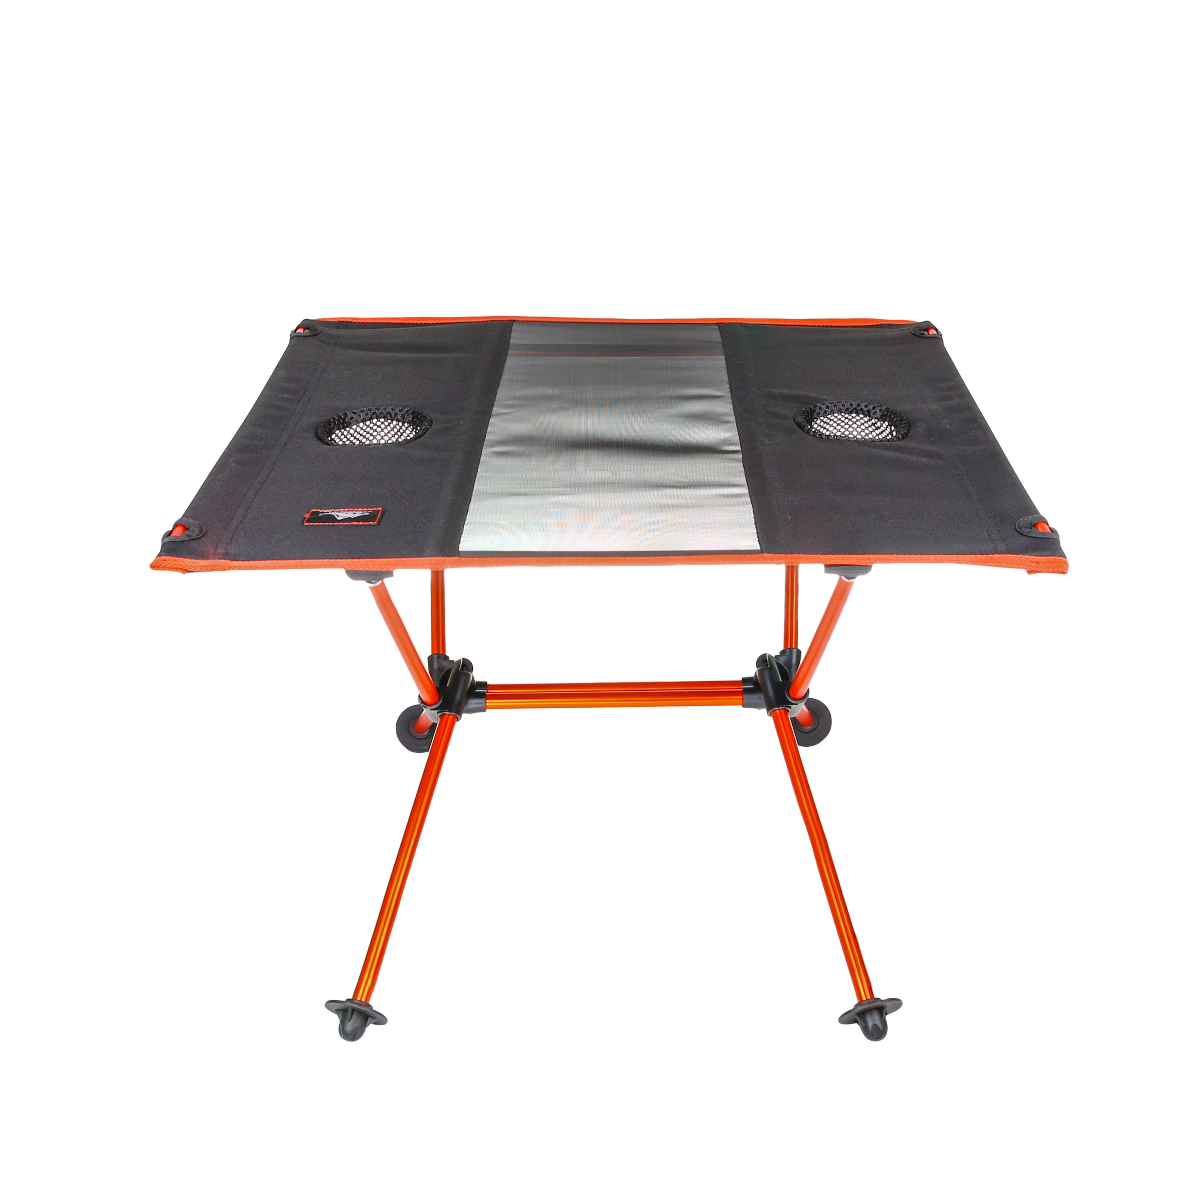 Cascade Wild Ultralight Backpacking Table and Cutting Board Review